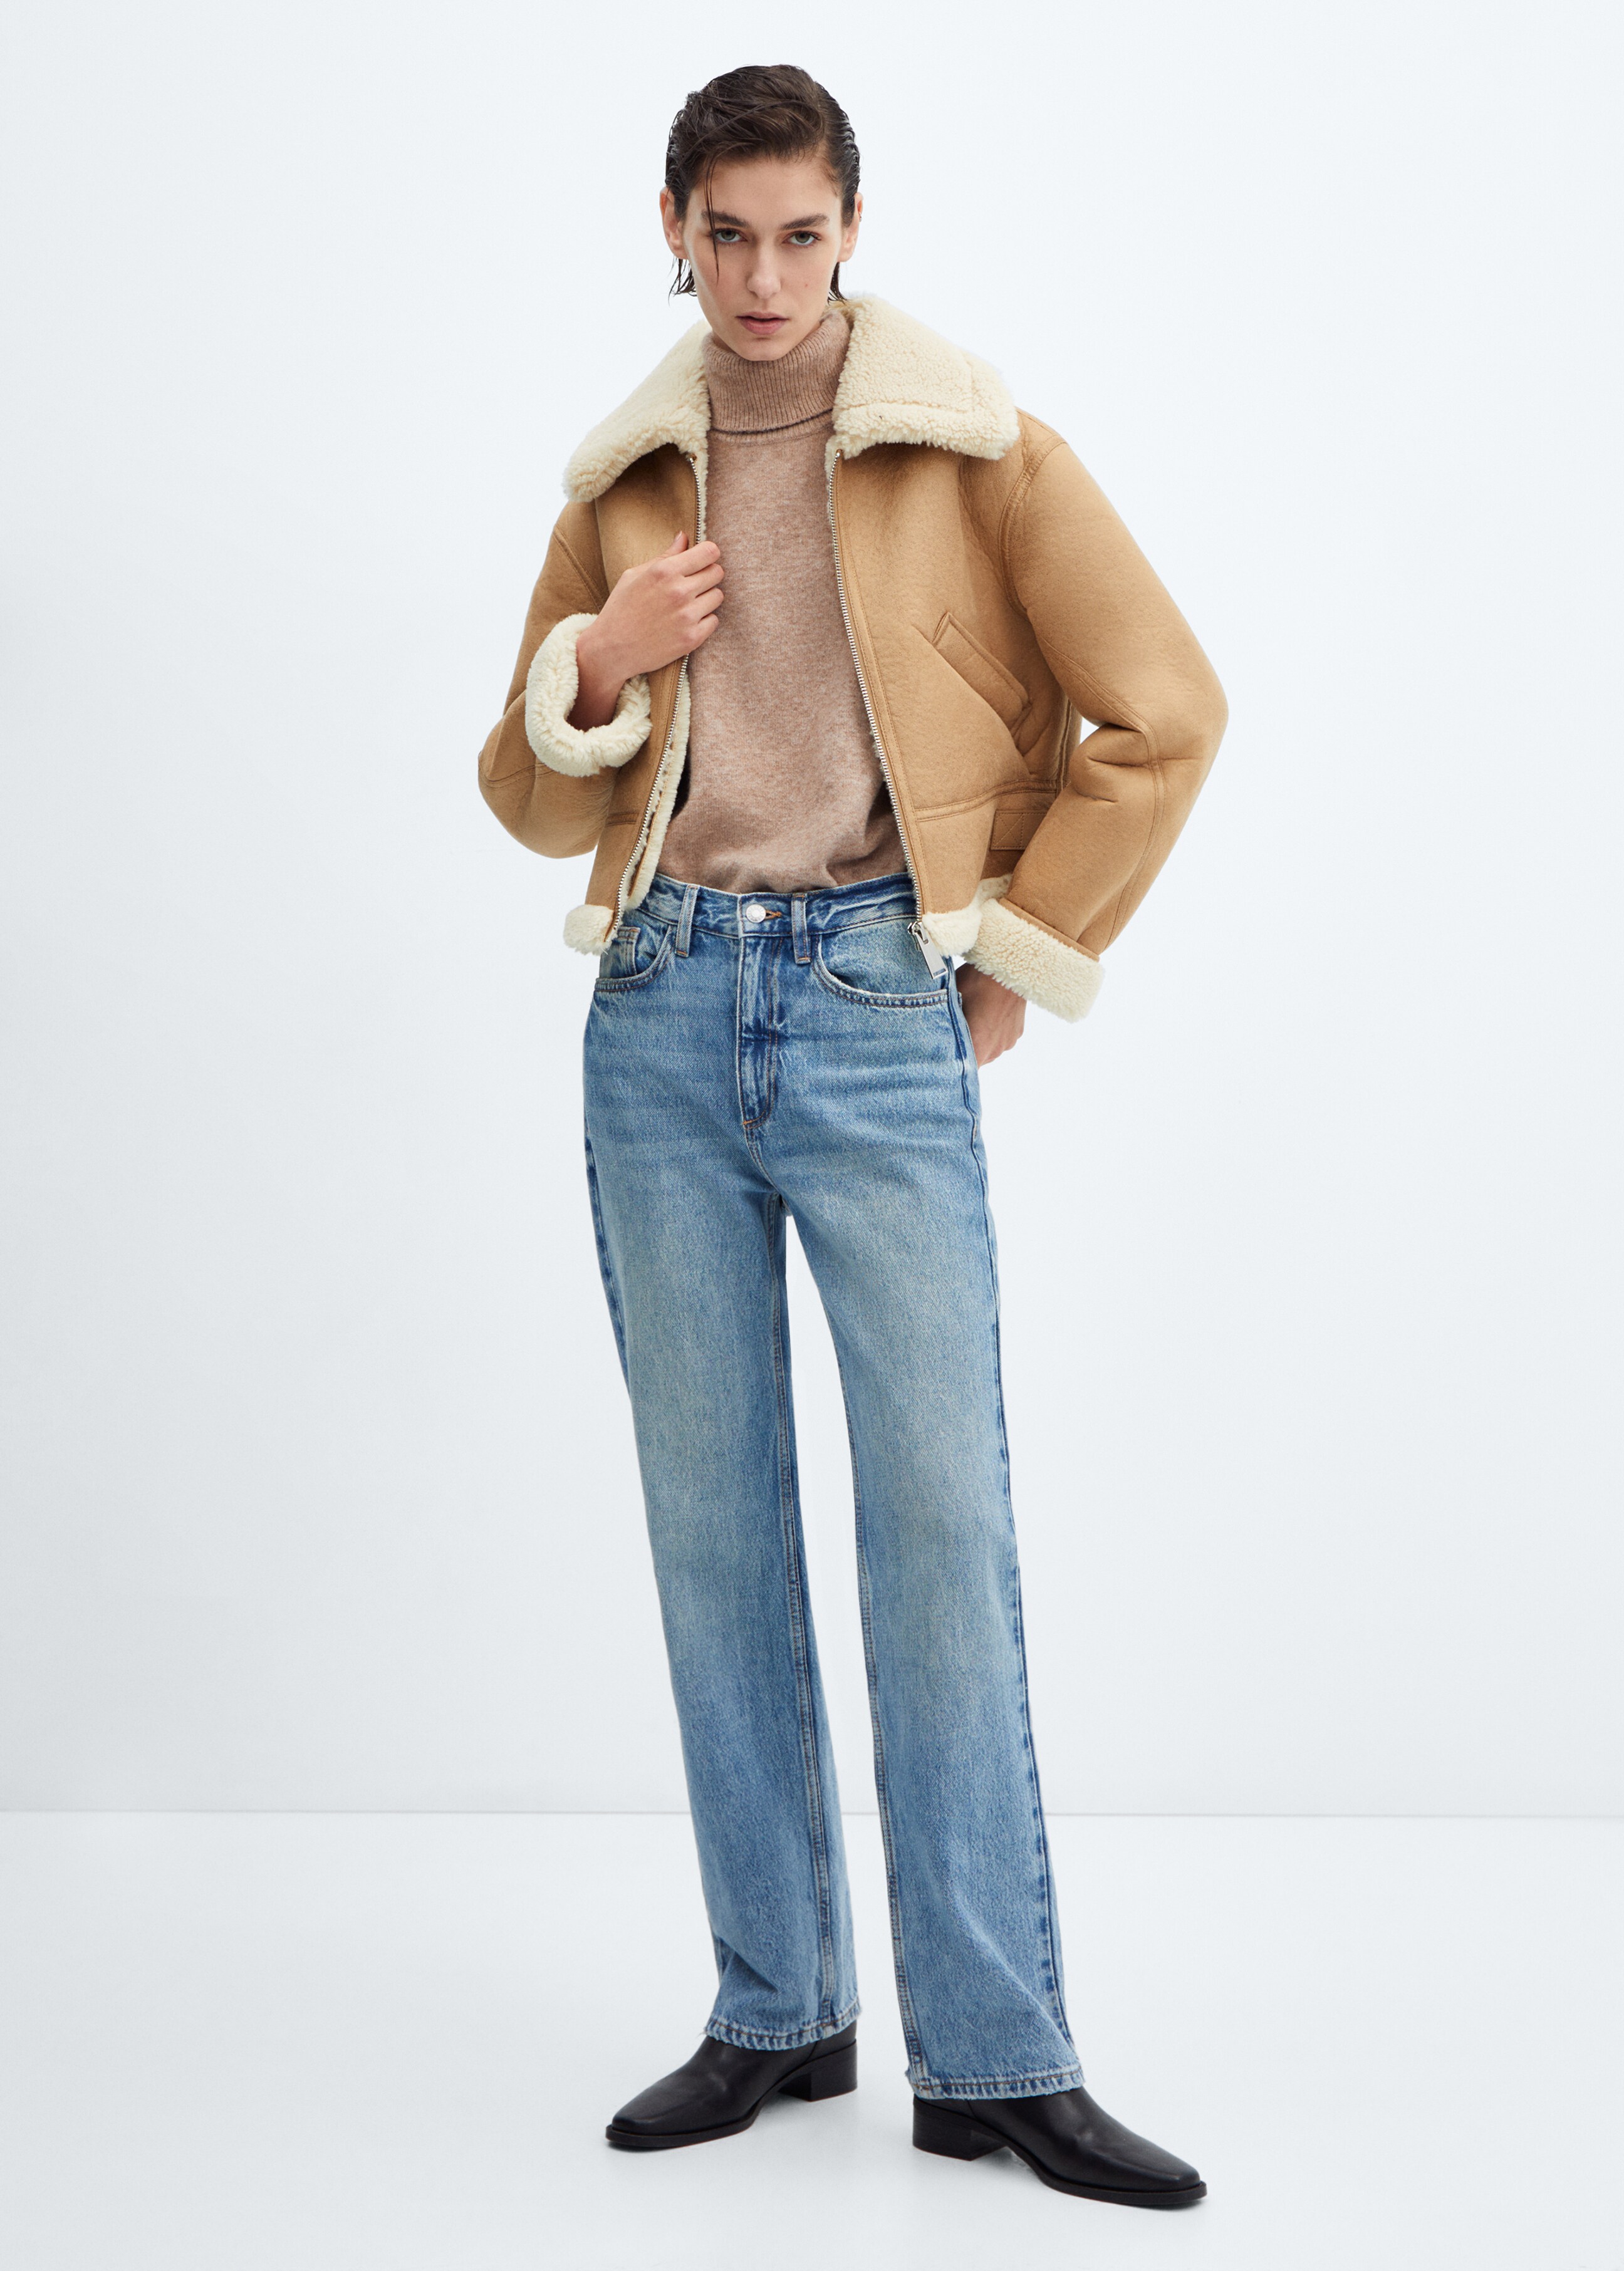 Faux shearling-lined short jacket